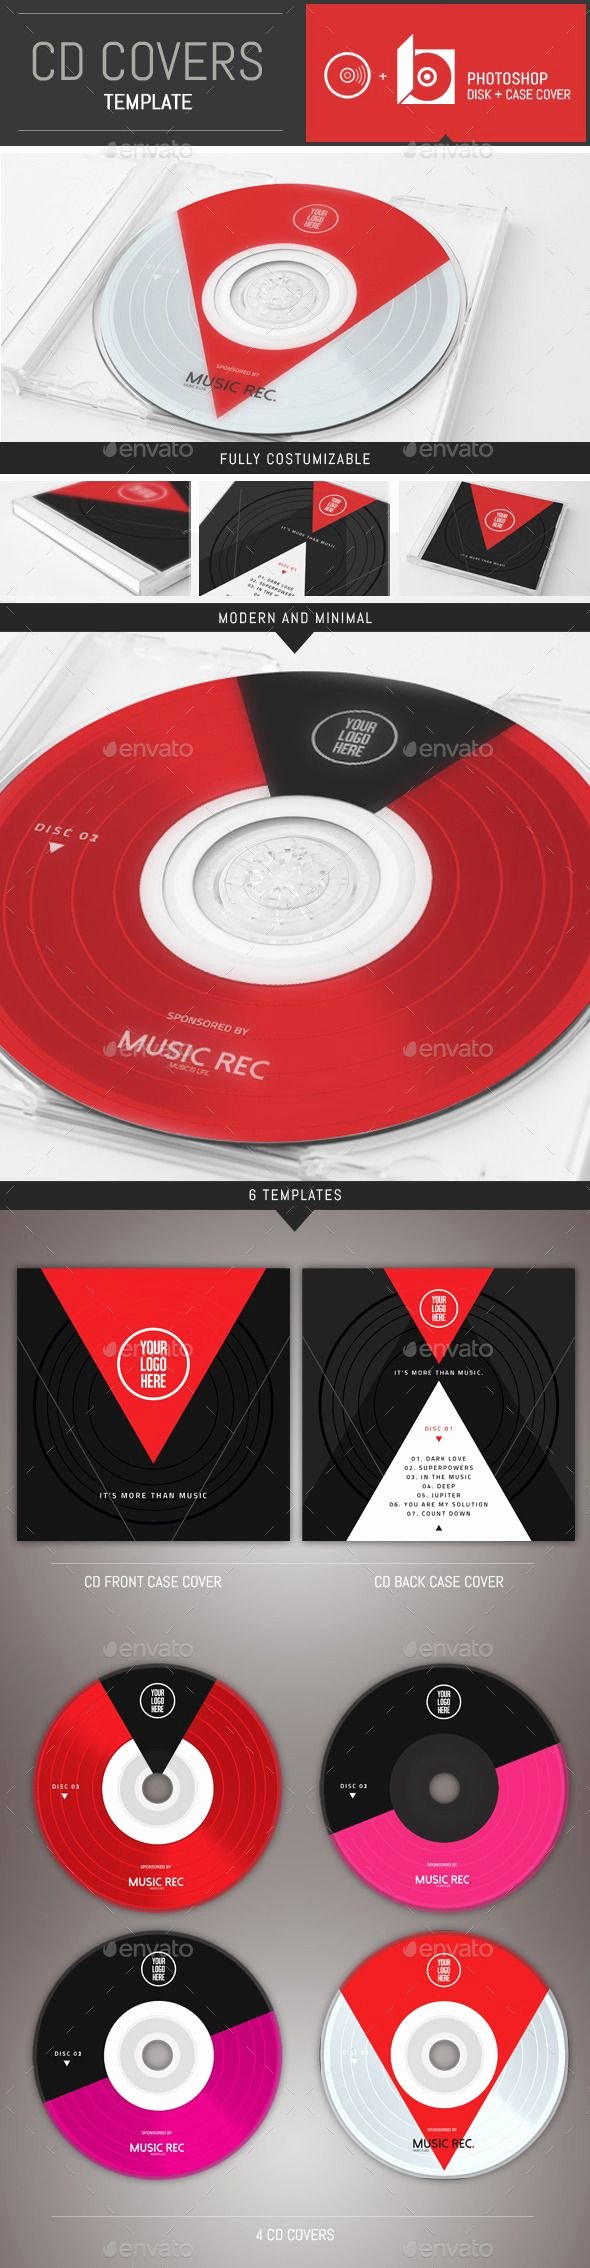 Cd Cover Template Photoshop Luxury 1000 Ideas About Cover Template On Pinterest